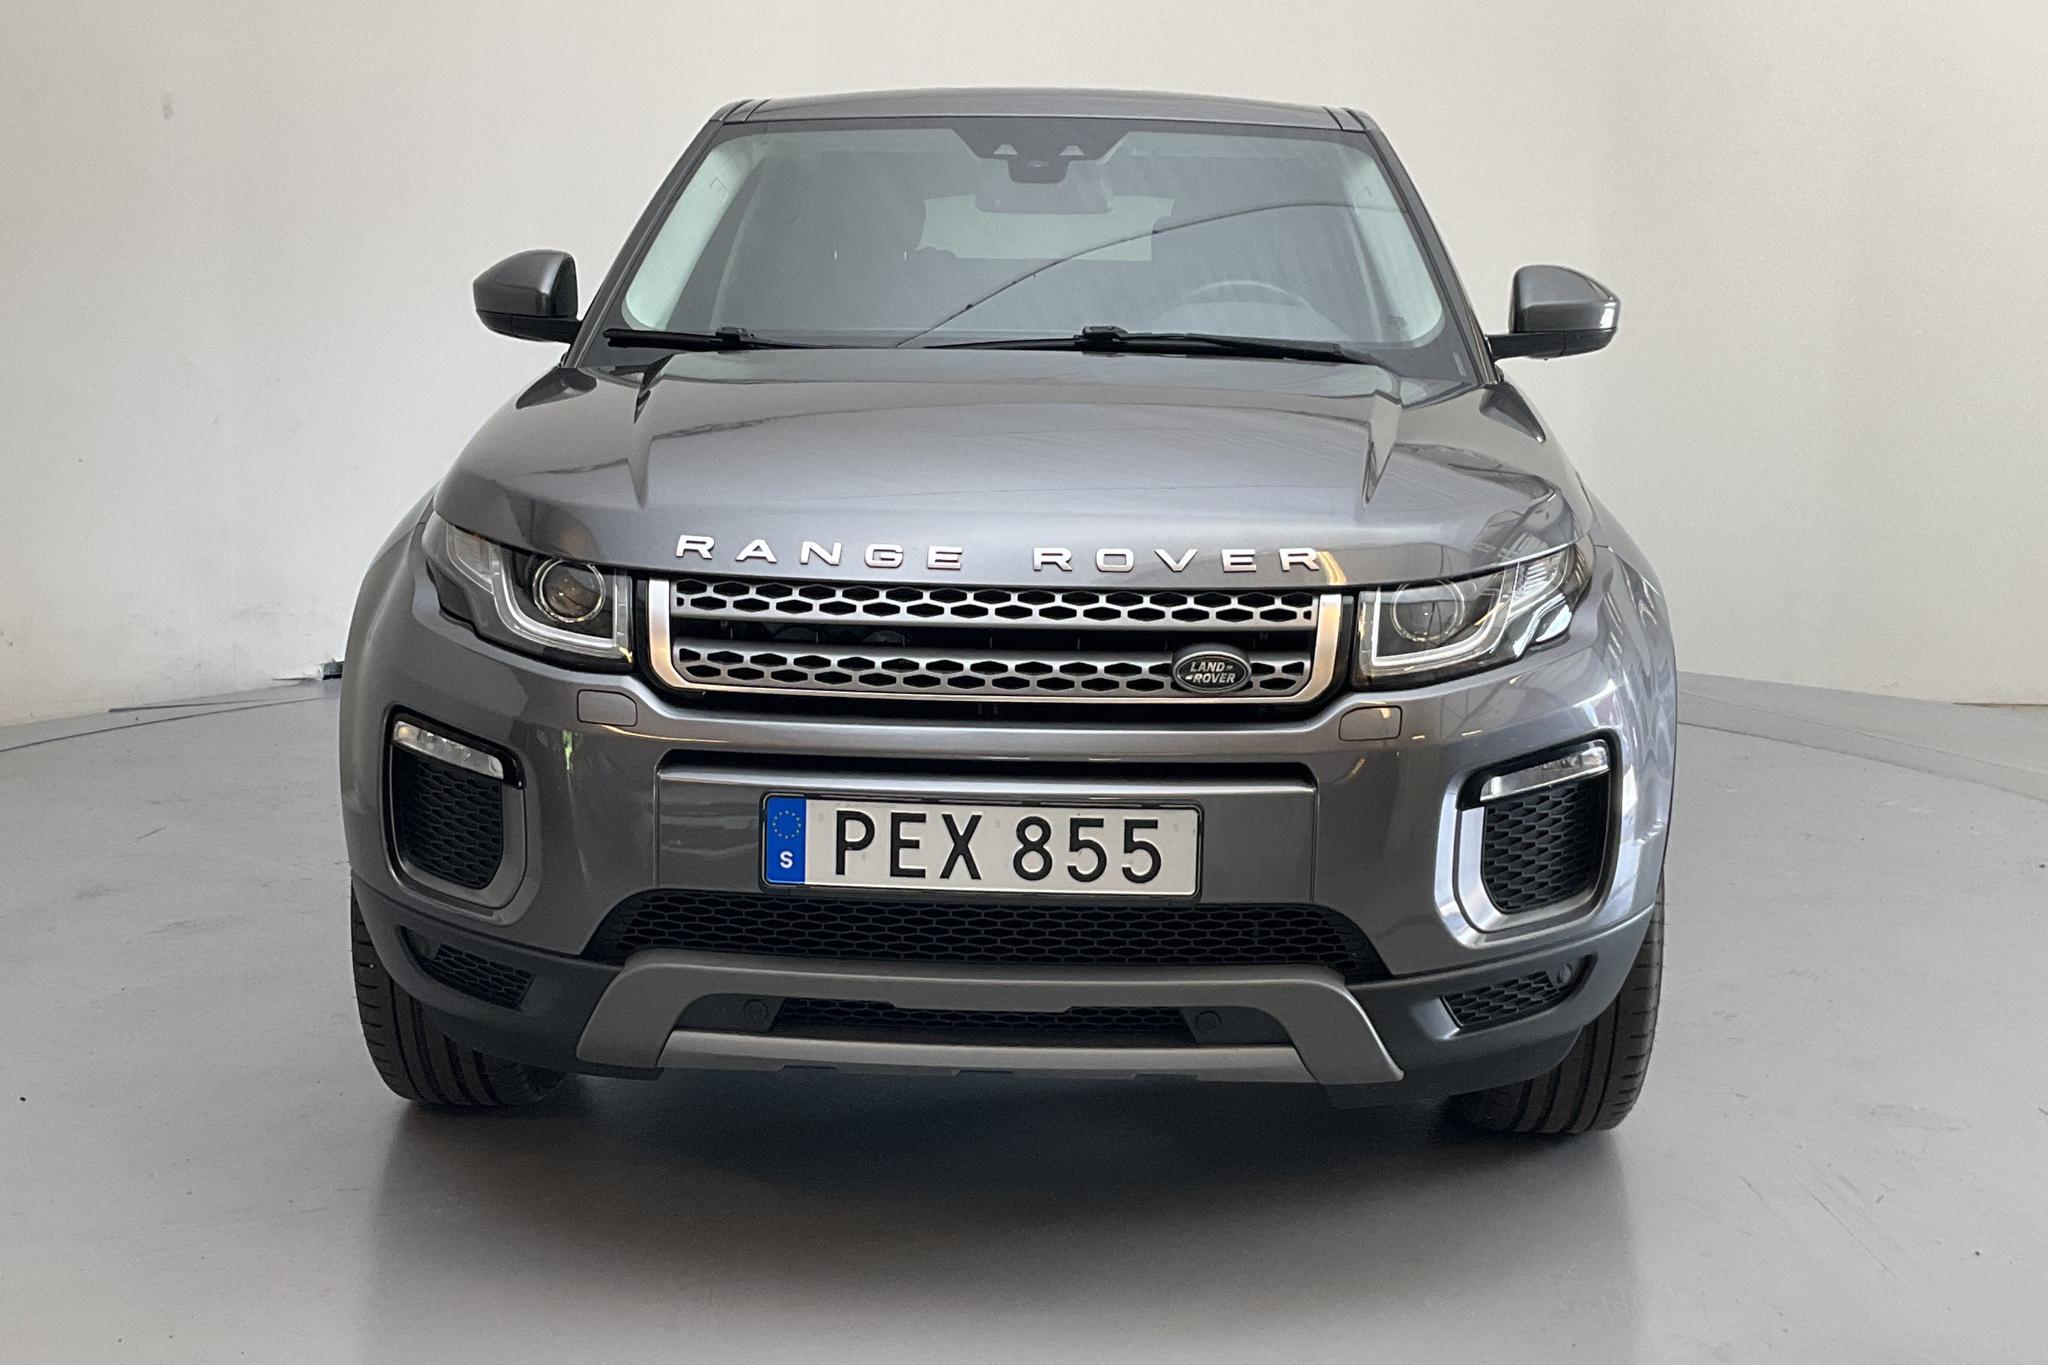 Land Rover Range Rover Evoque 2.0 TD4 AWD 5dr (180hk) - 105 830 km - Automatic - gray - 2017